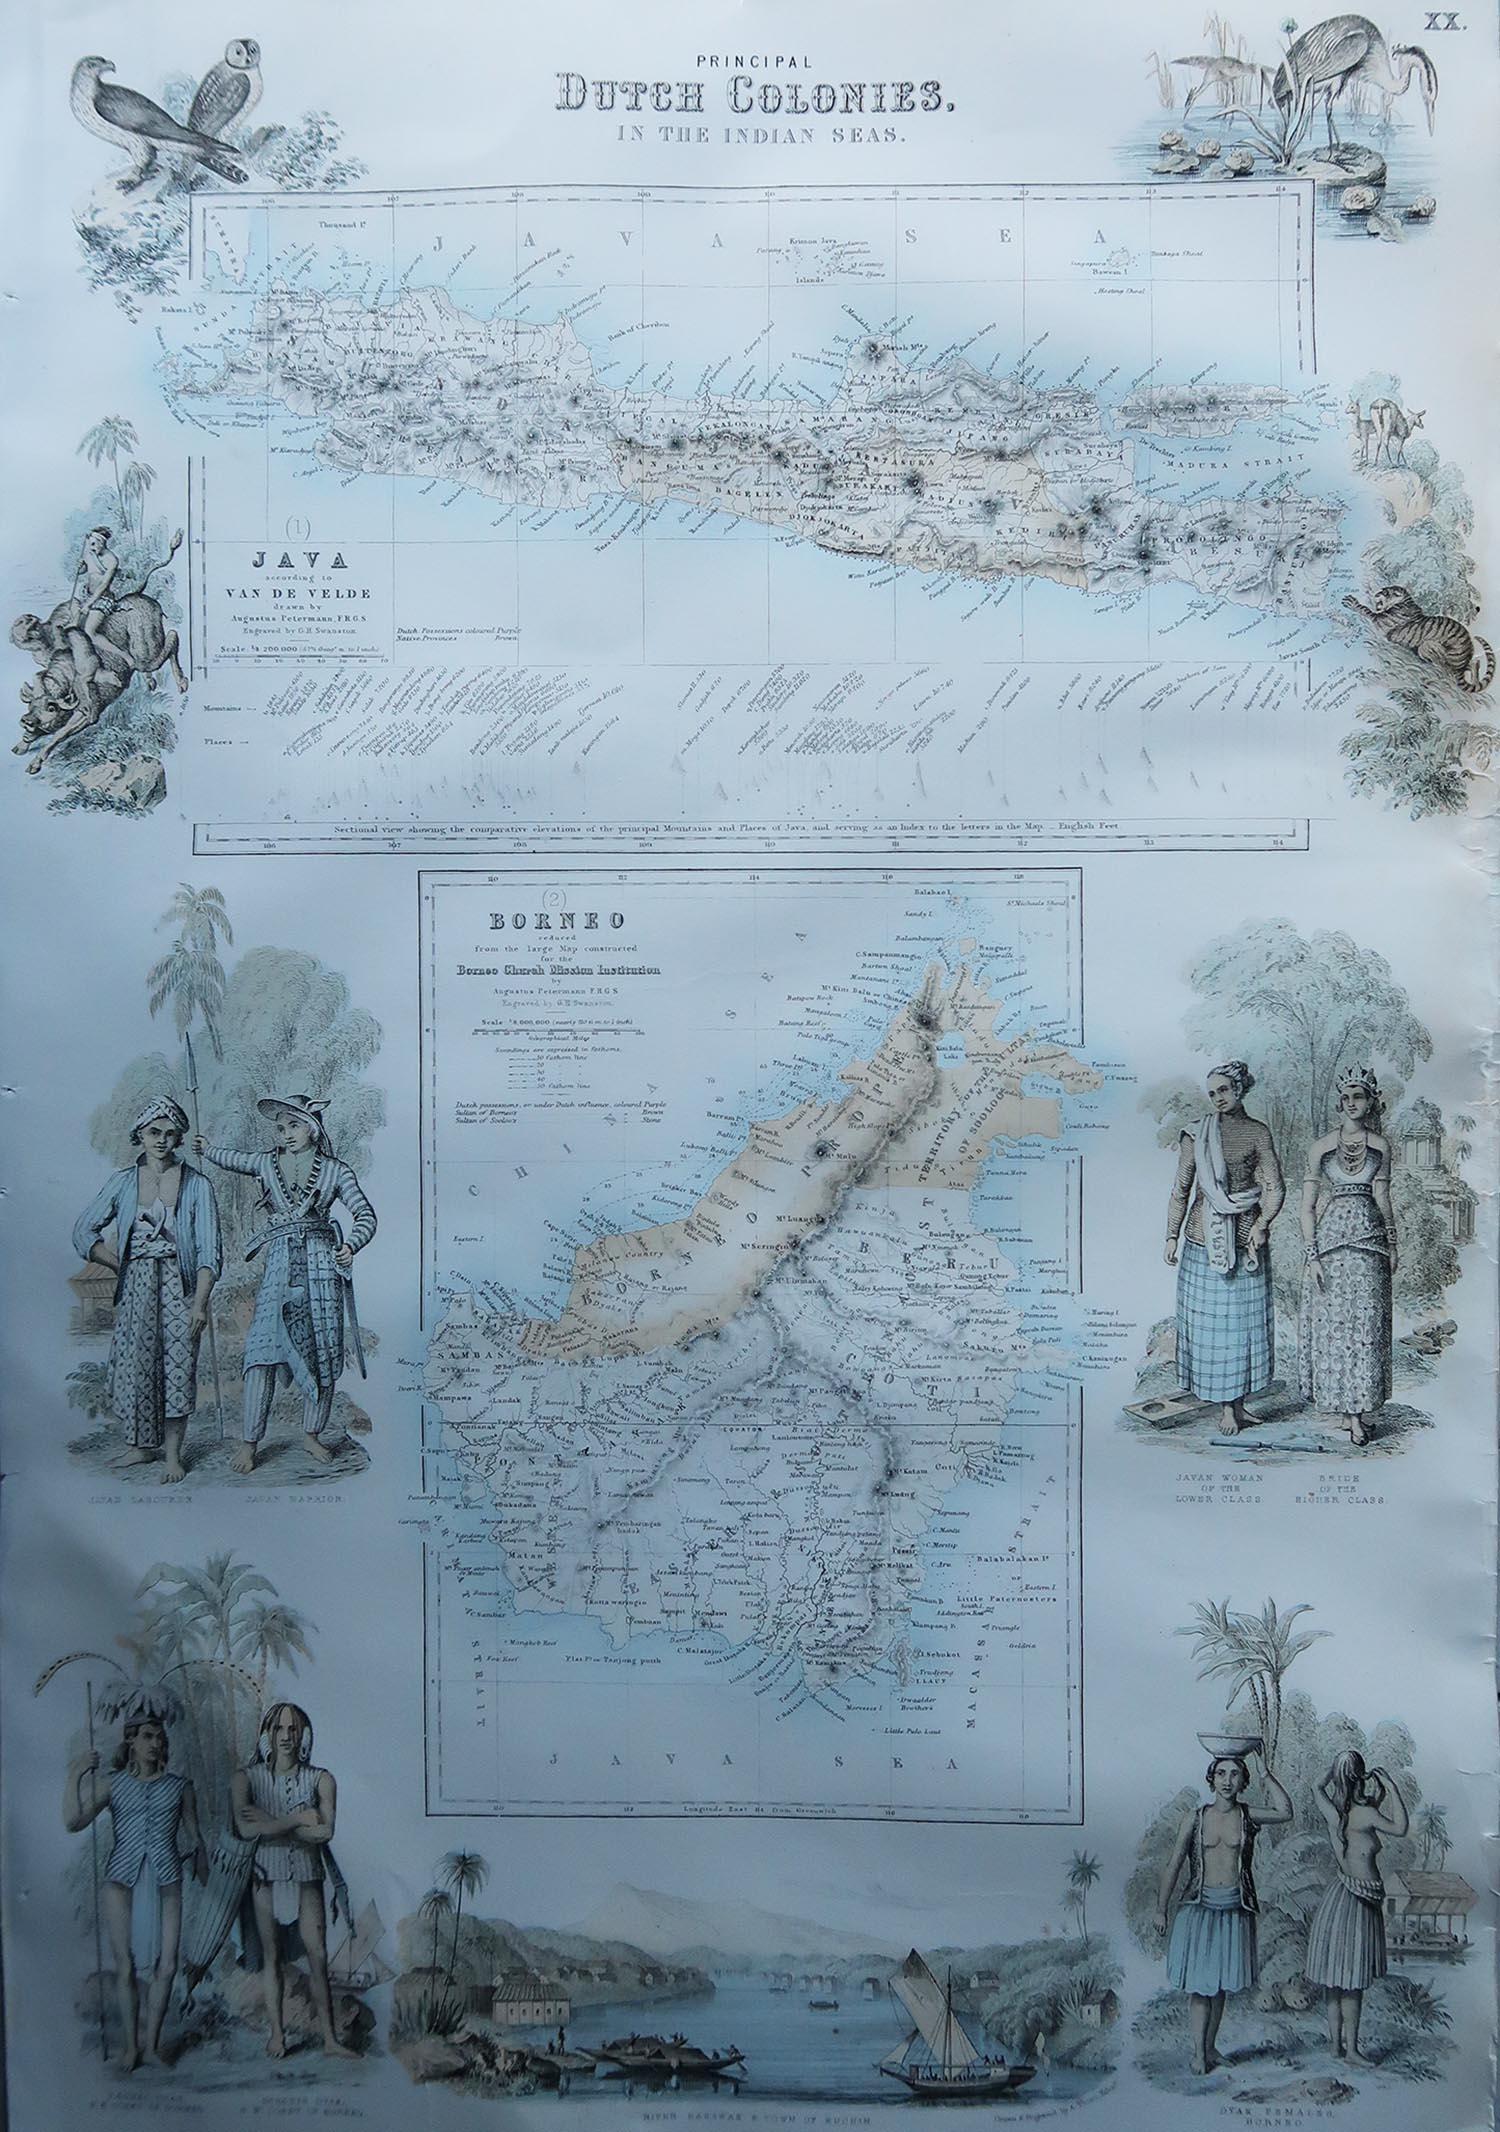 Great map of Java and Borneo

Wonderful figurative borders

From the celebrated Royal Illustrated Atlas

Lithograph. Original color. 

Published by Fullarton, Edinburgh. C.1870

Unframed.

Repair to a short tear on bottom edge. Slightly weak paper